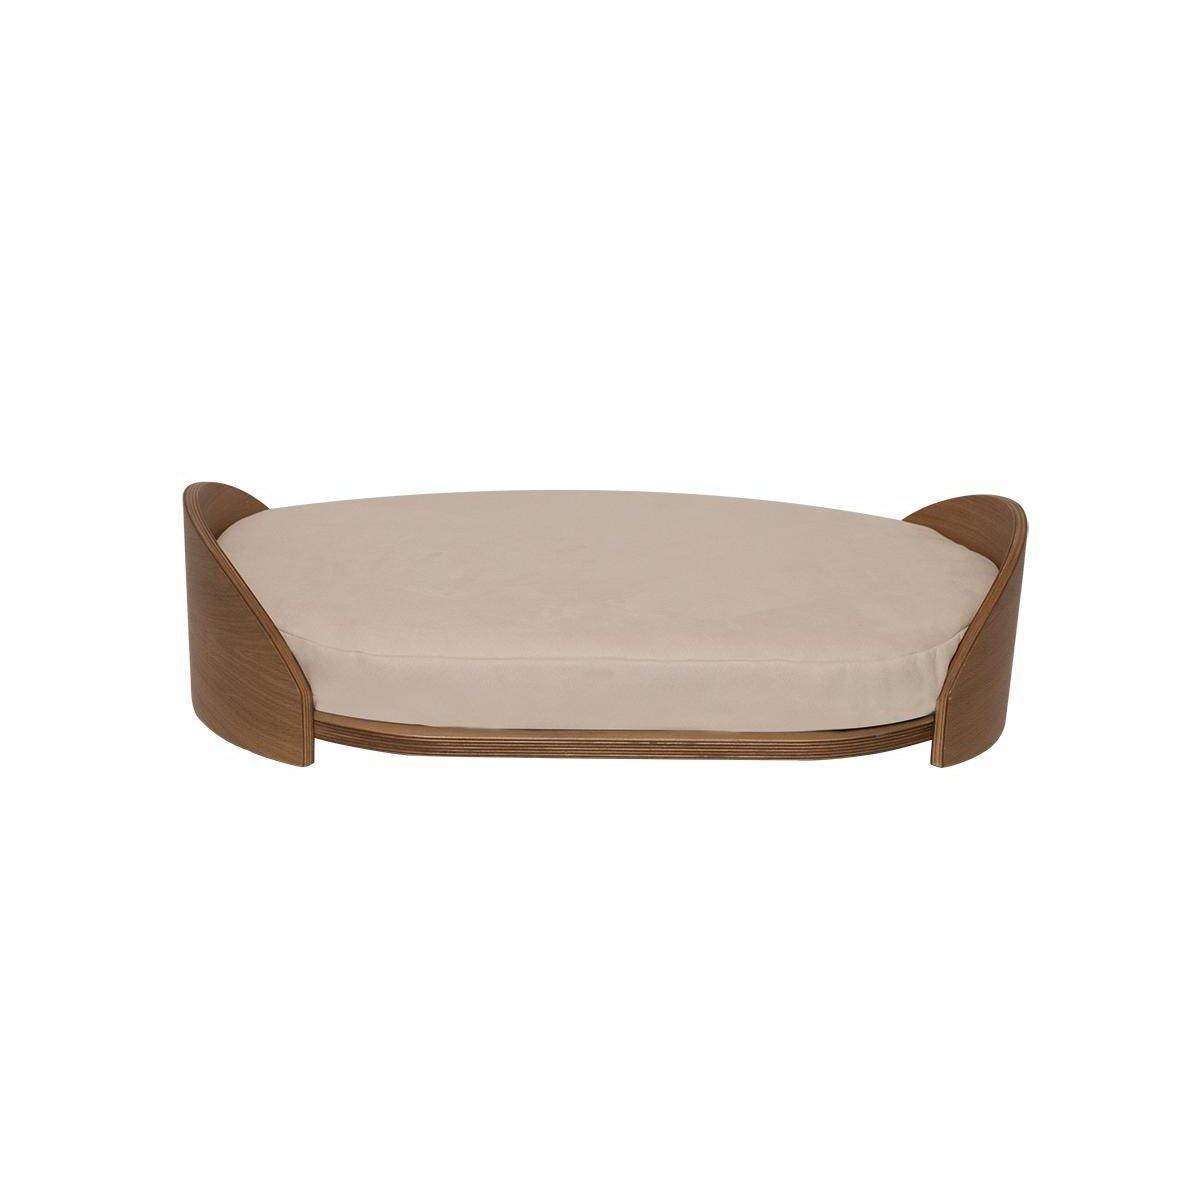 Cat Bed Chios - Cat Beds - Luxury Dog House - ewoodcollection.com